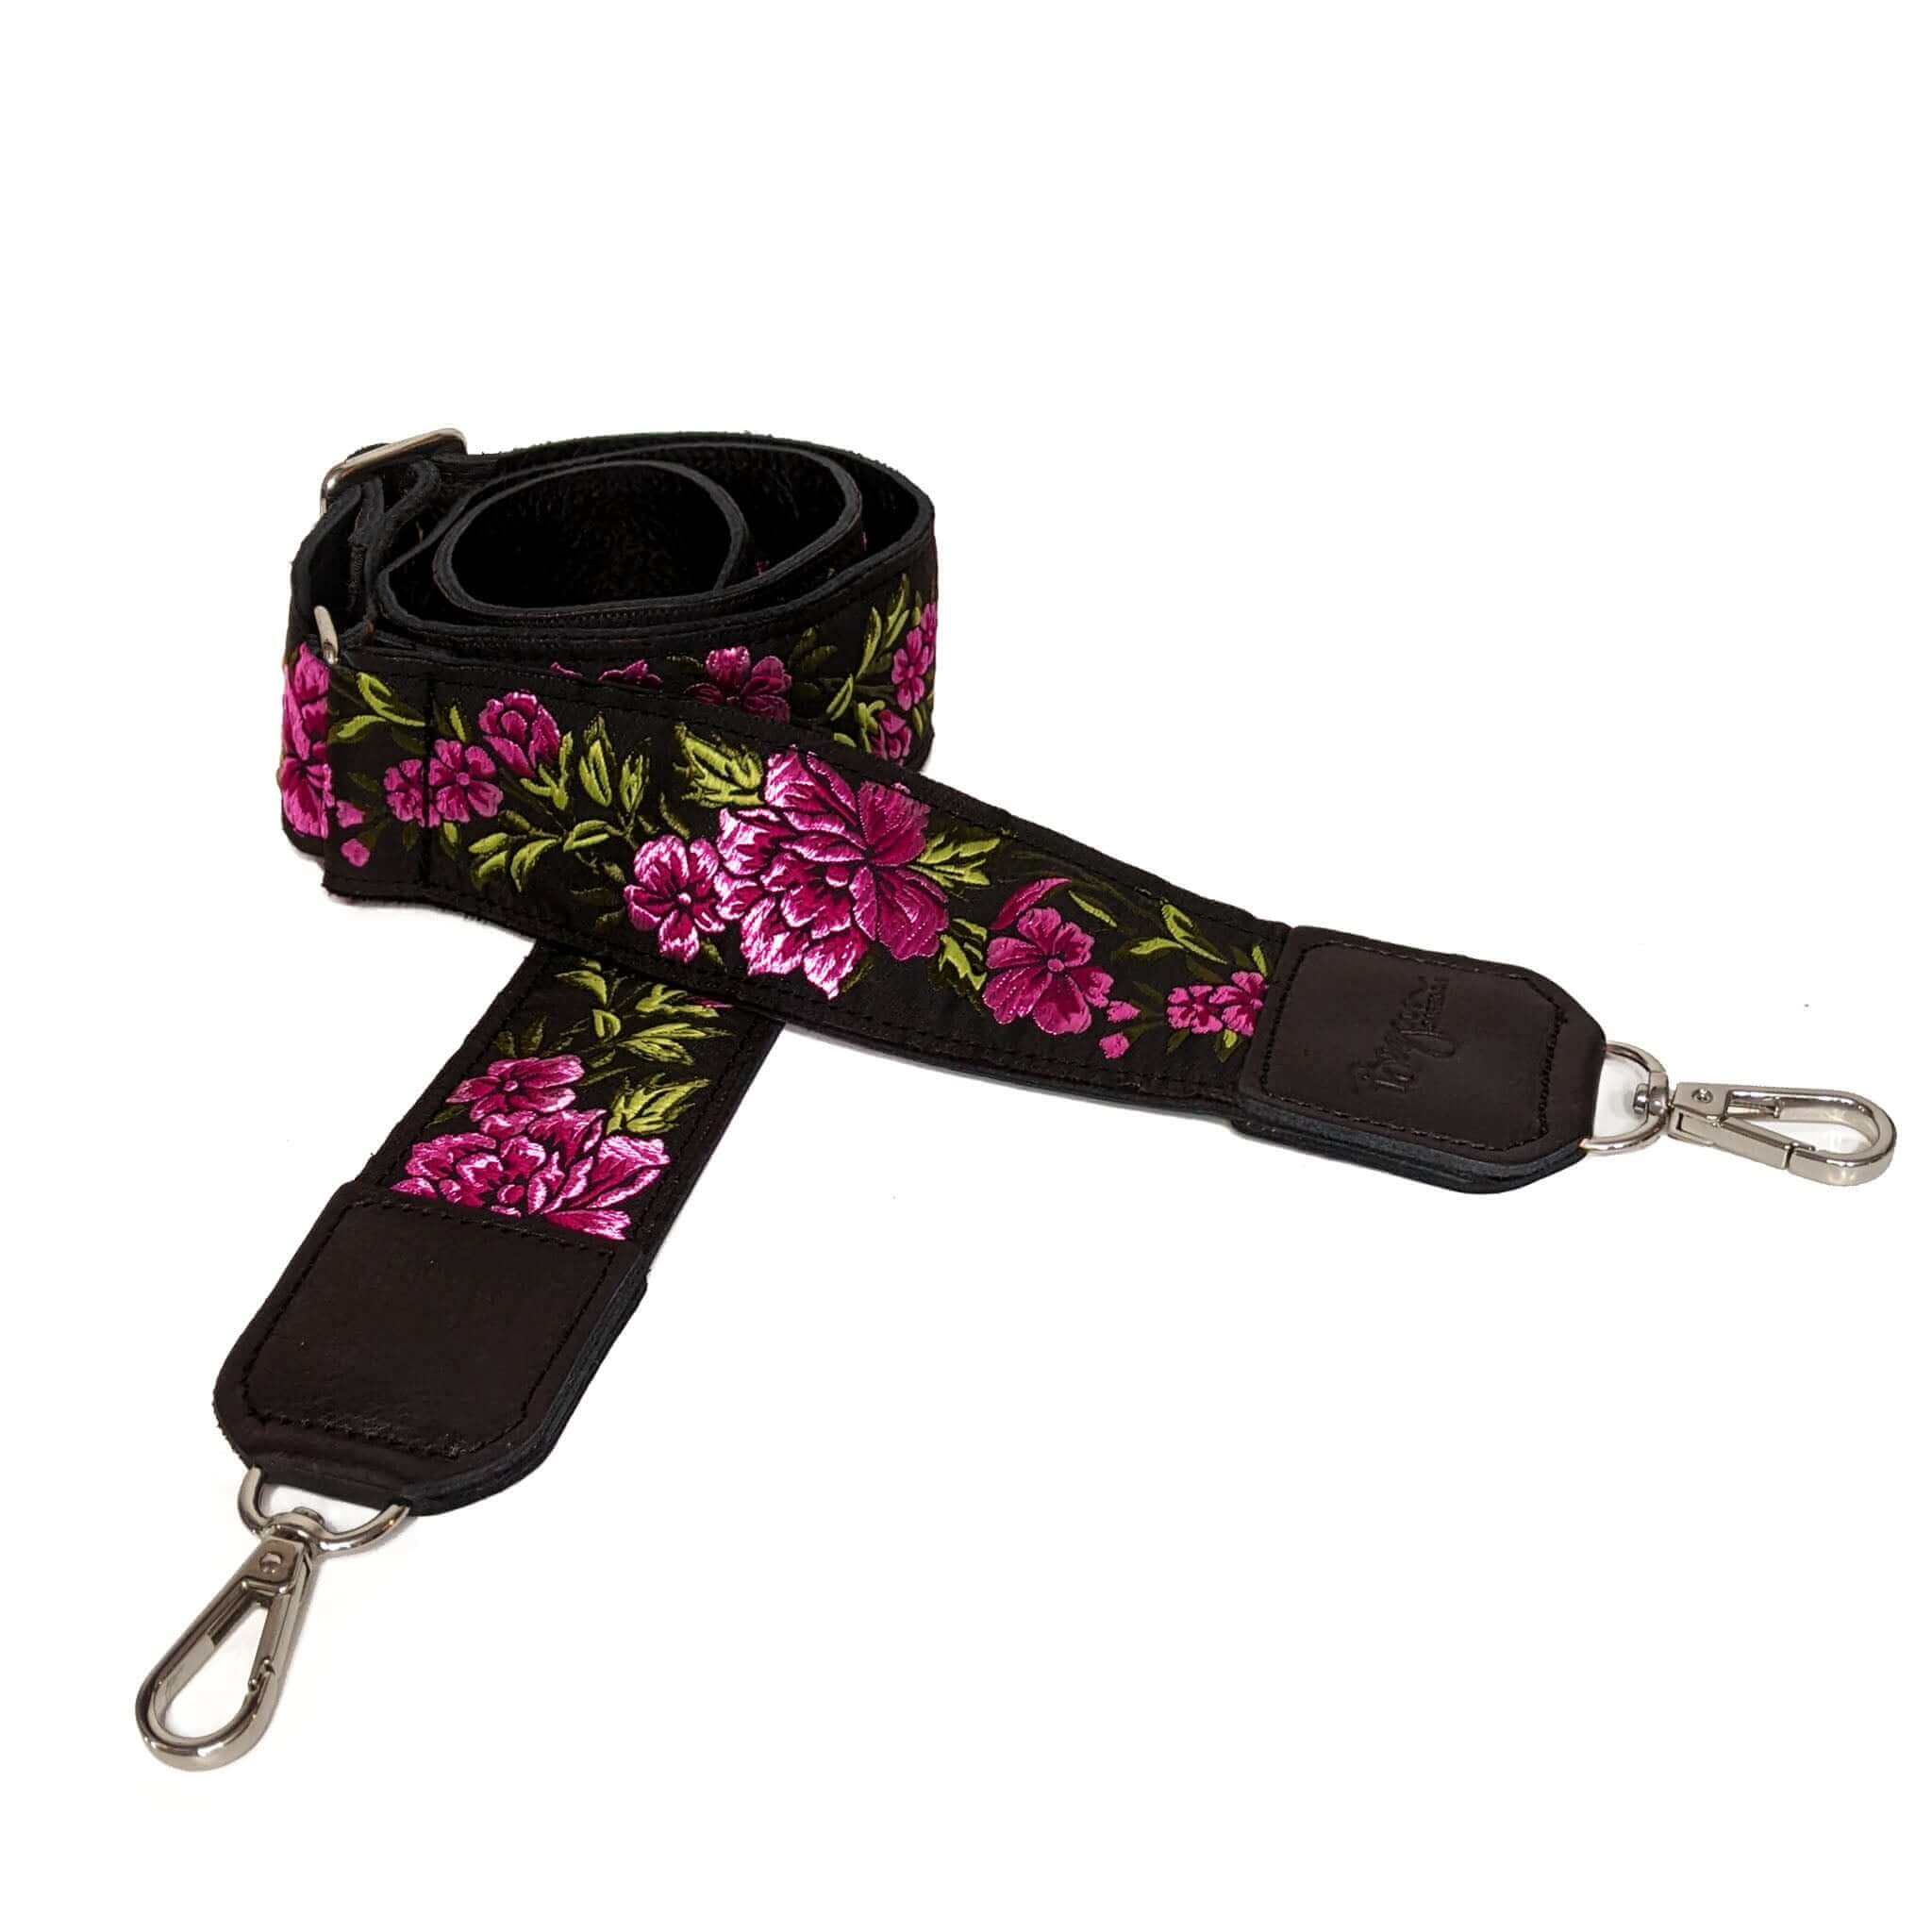 Buy Floral Wallet Online In India - Etsy India